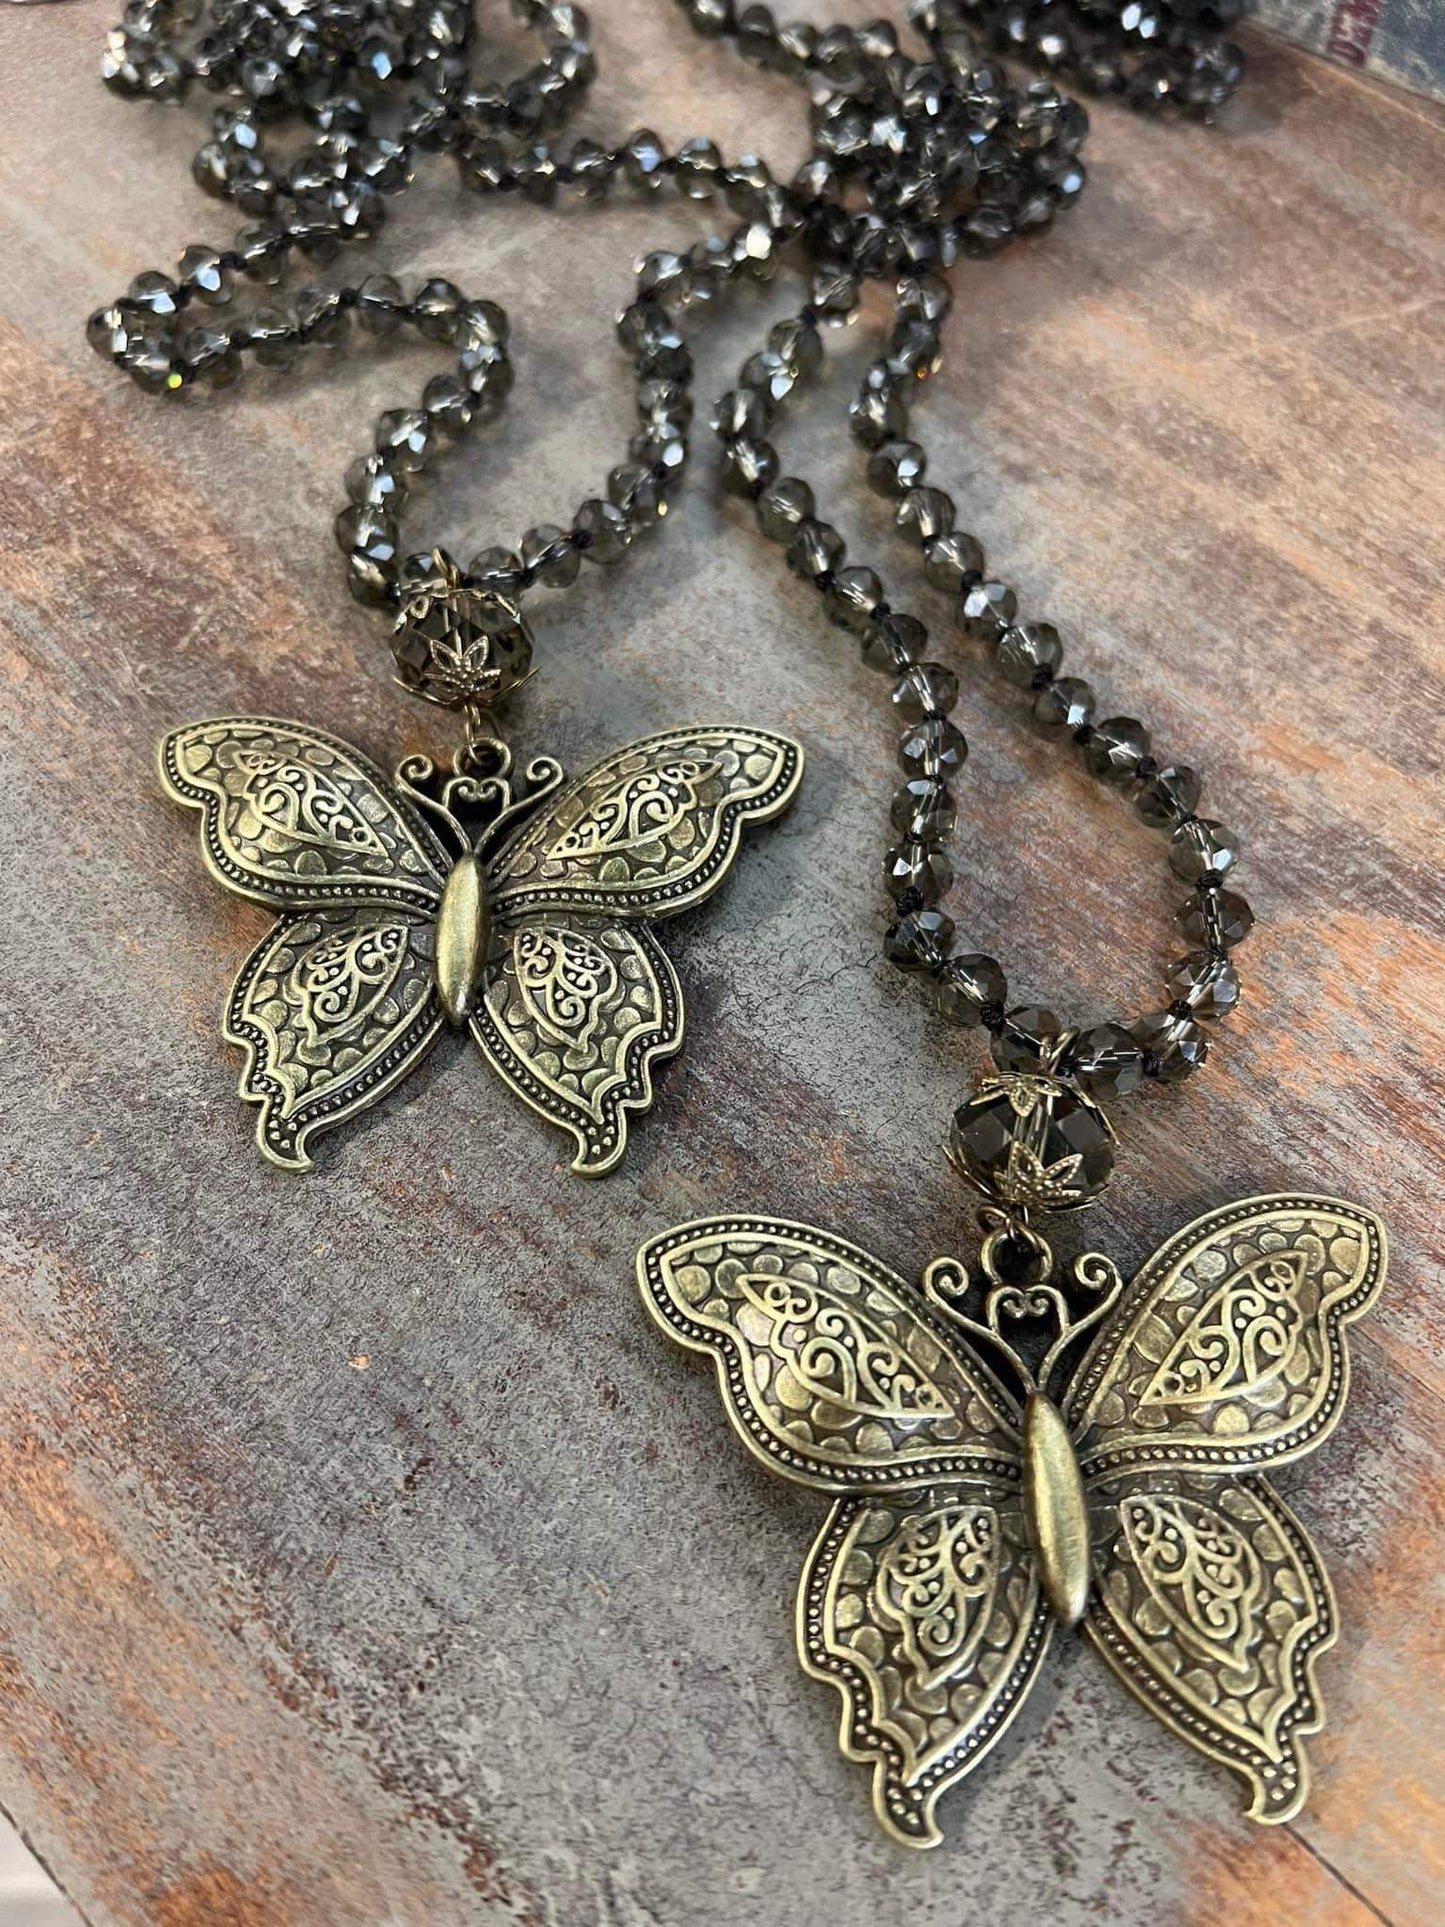 Beaded butterfly necklaces